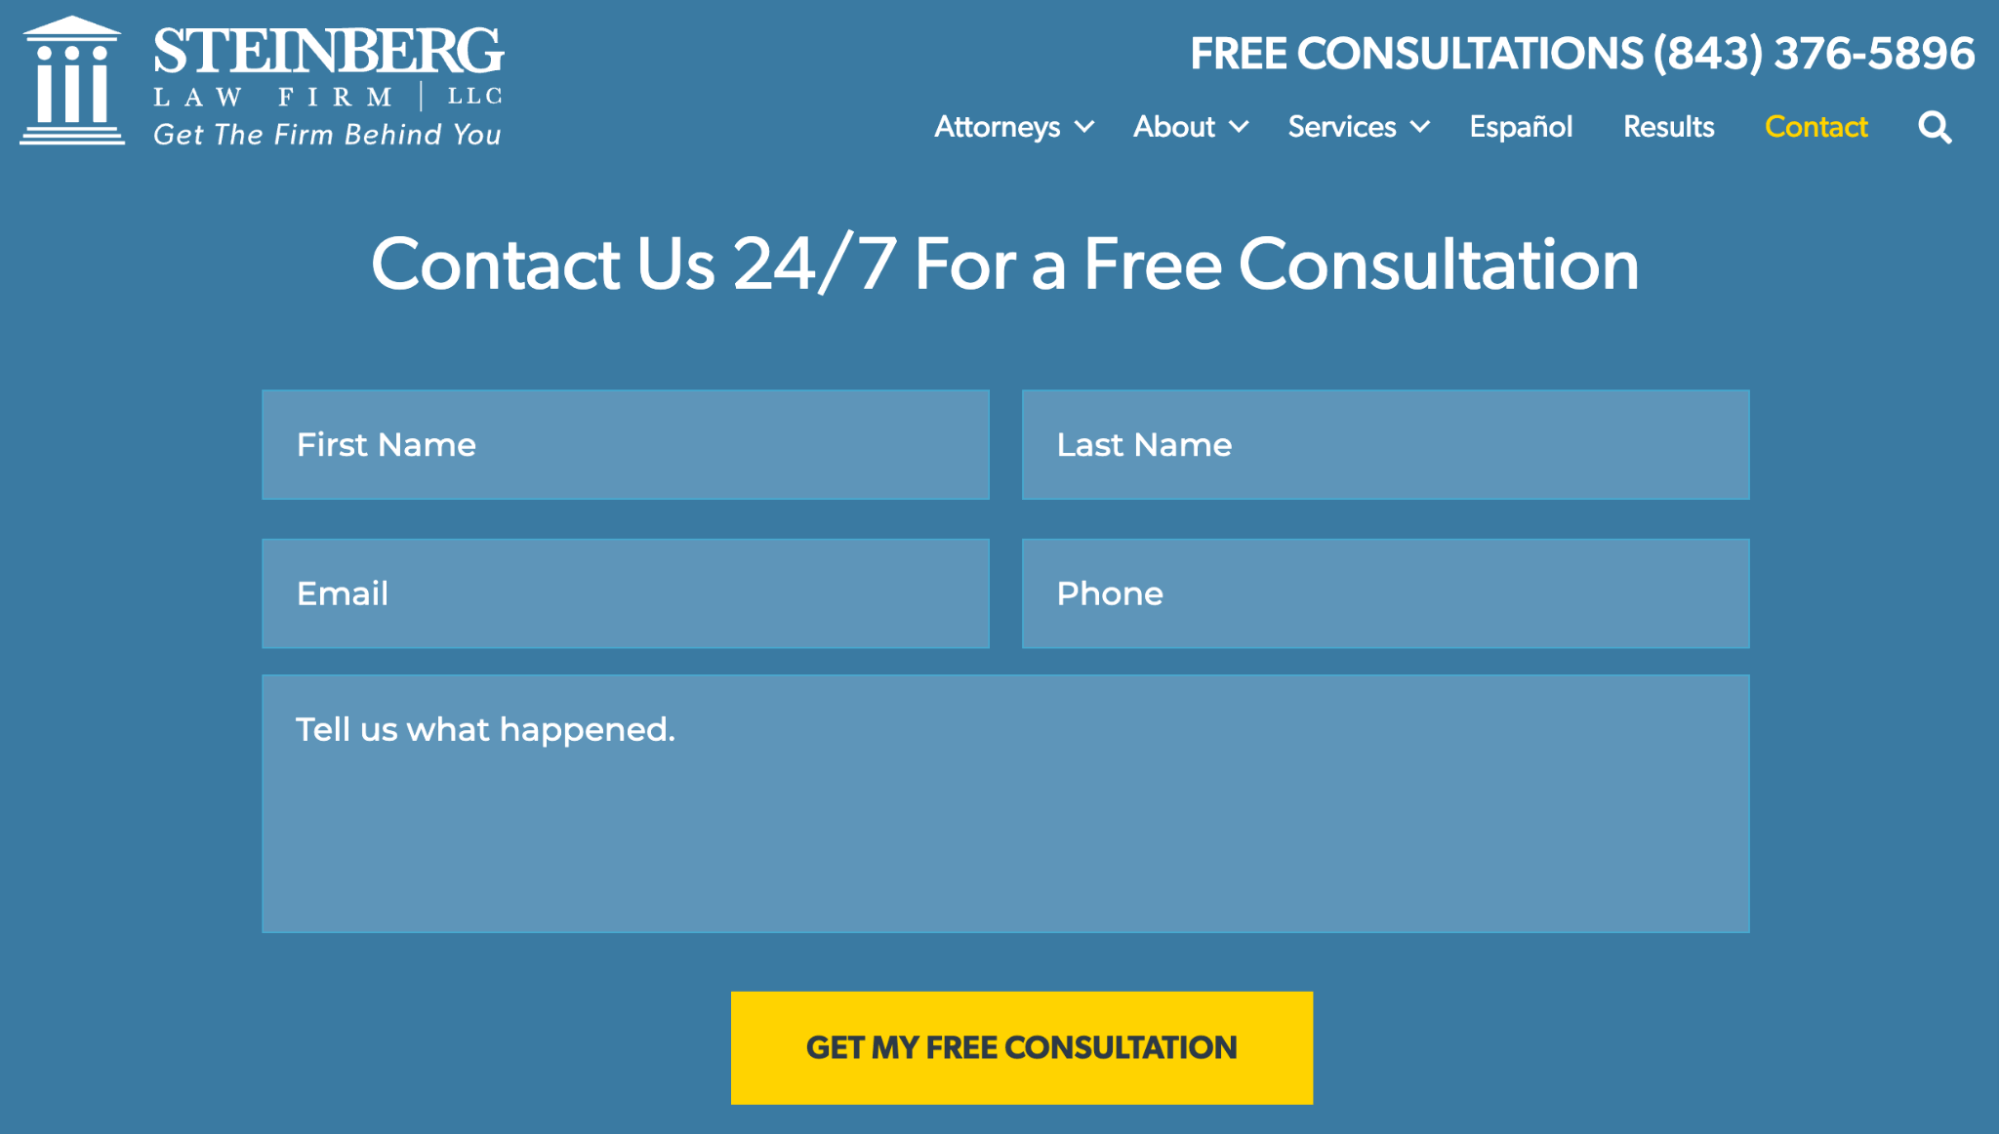 Example free legal consultation form on a law firm's website